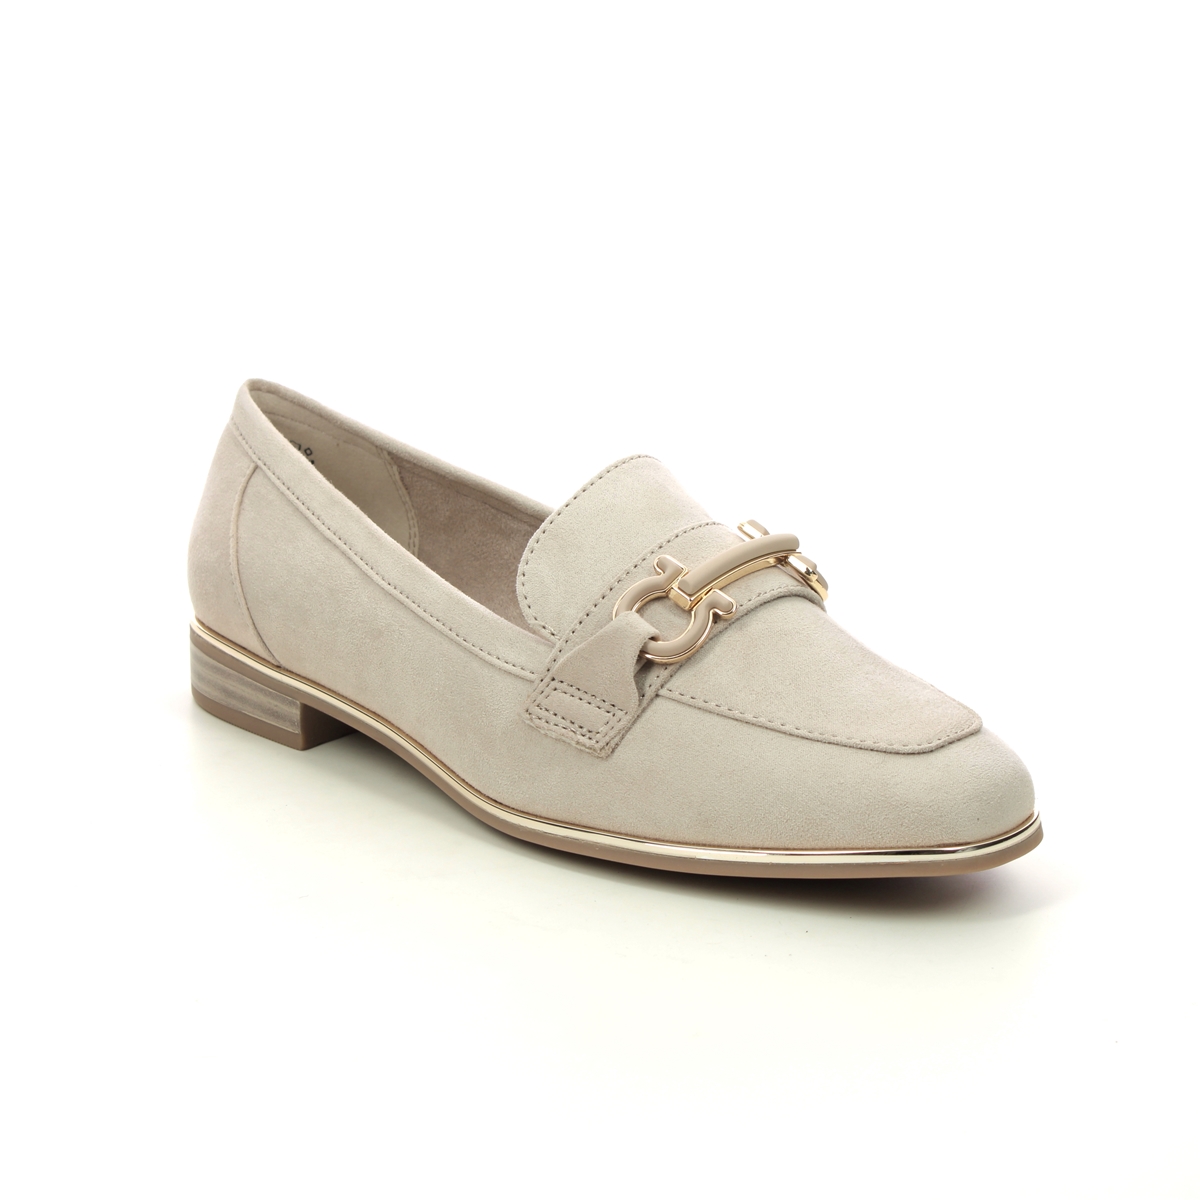 Marco Tozzi Sopi Serina Beige Womens loafers 24206-42-404 in a Plain Textile in Size 41